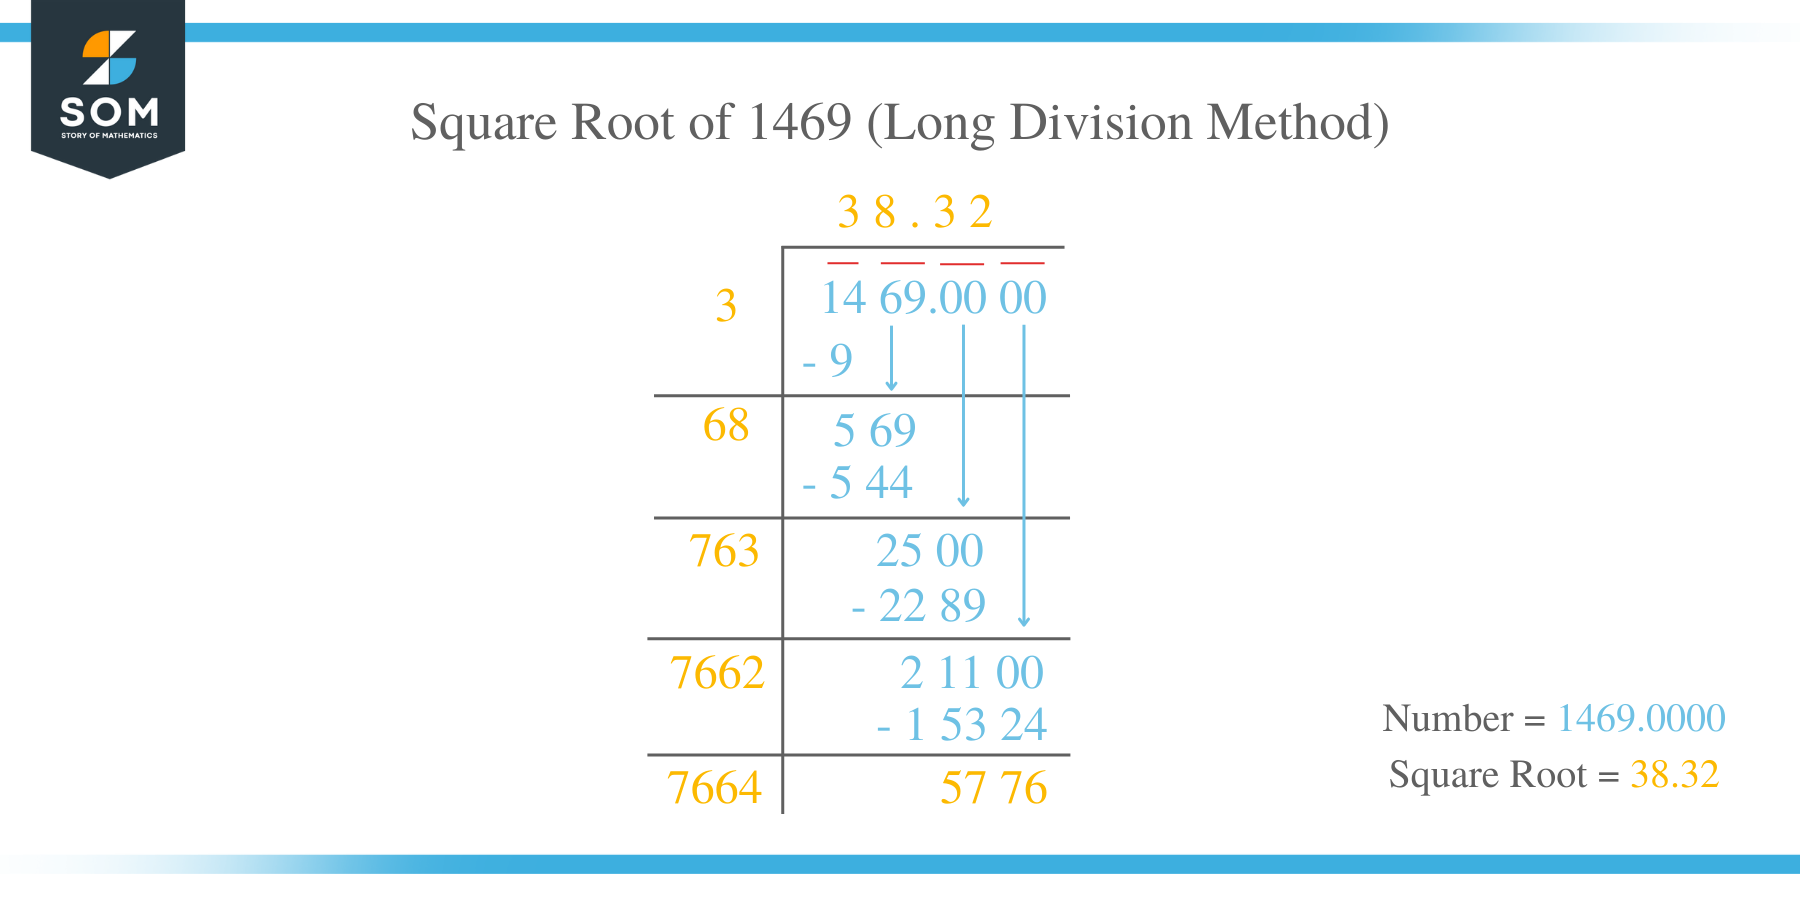 Square Root of 1469 by Long Division Method